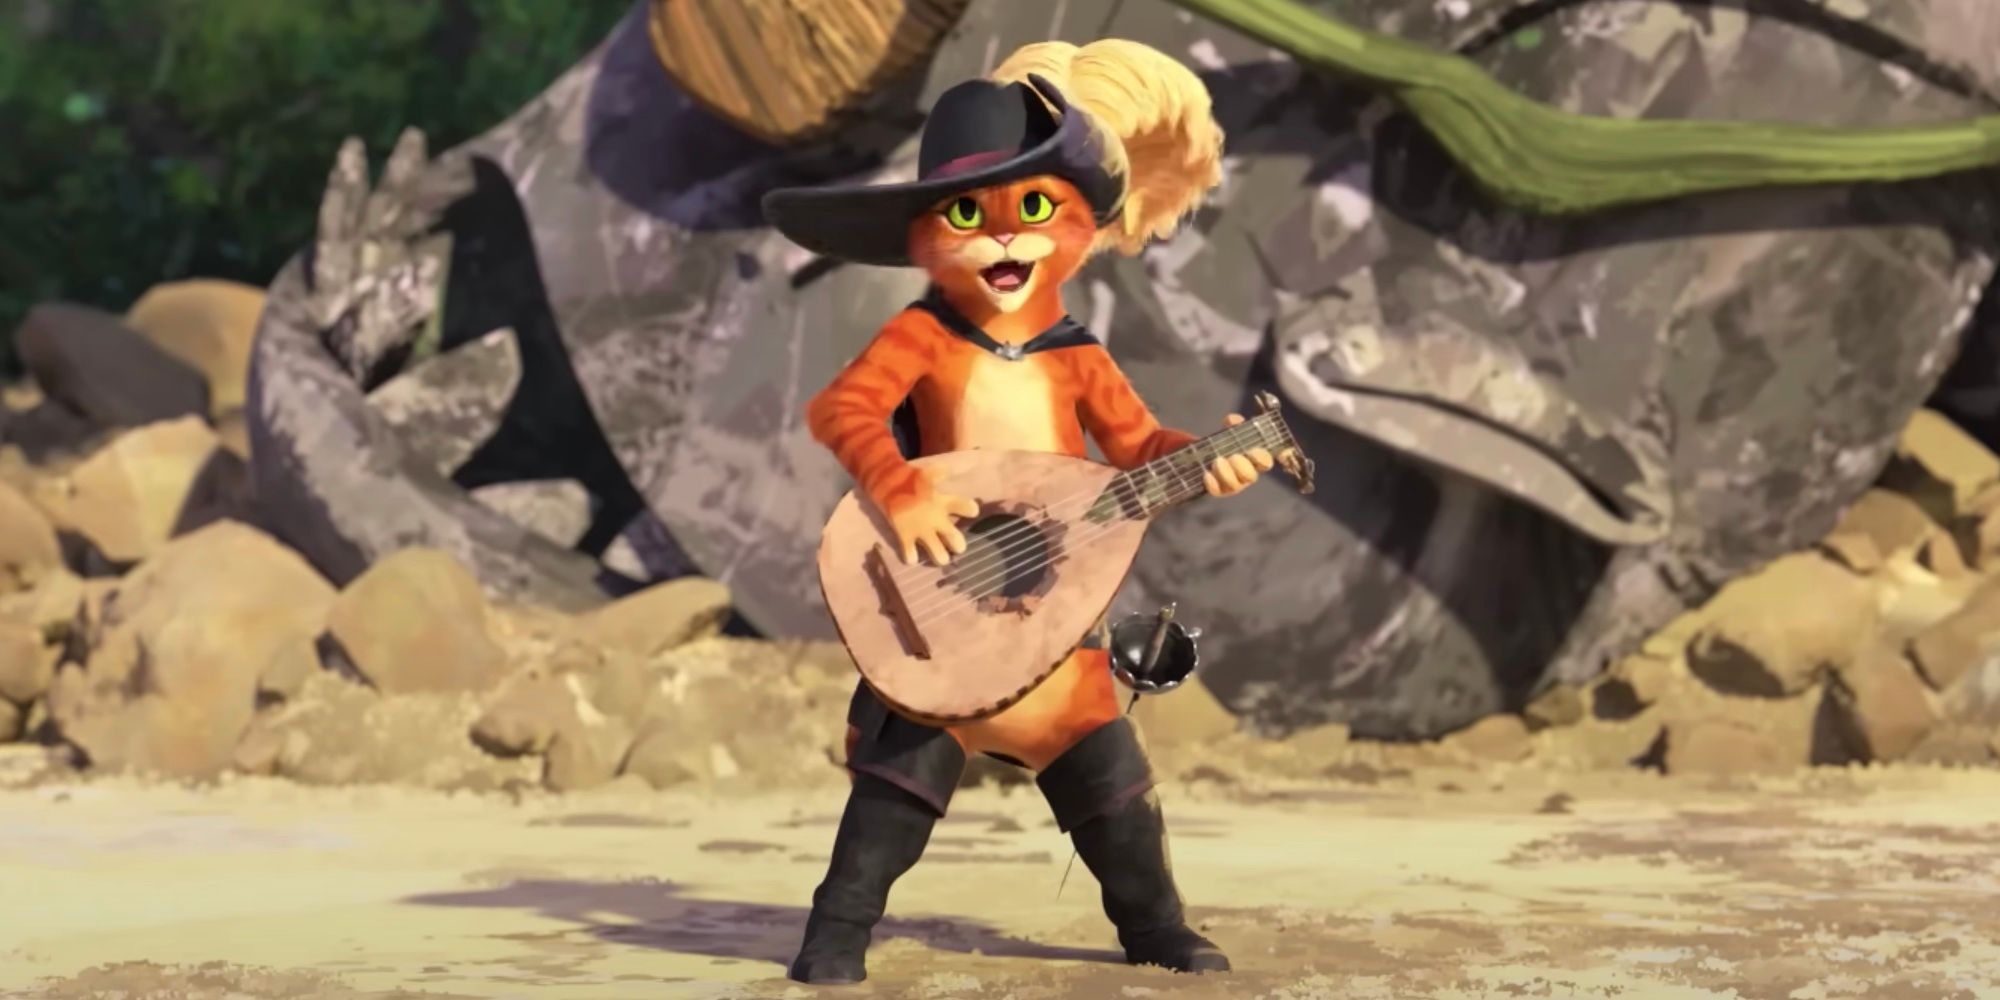 Puss in Boots playing his guitar in The Last Wish.